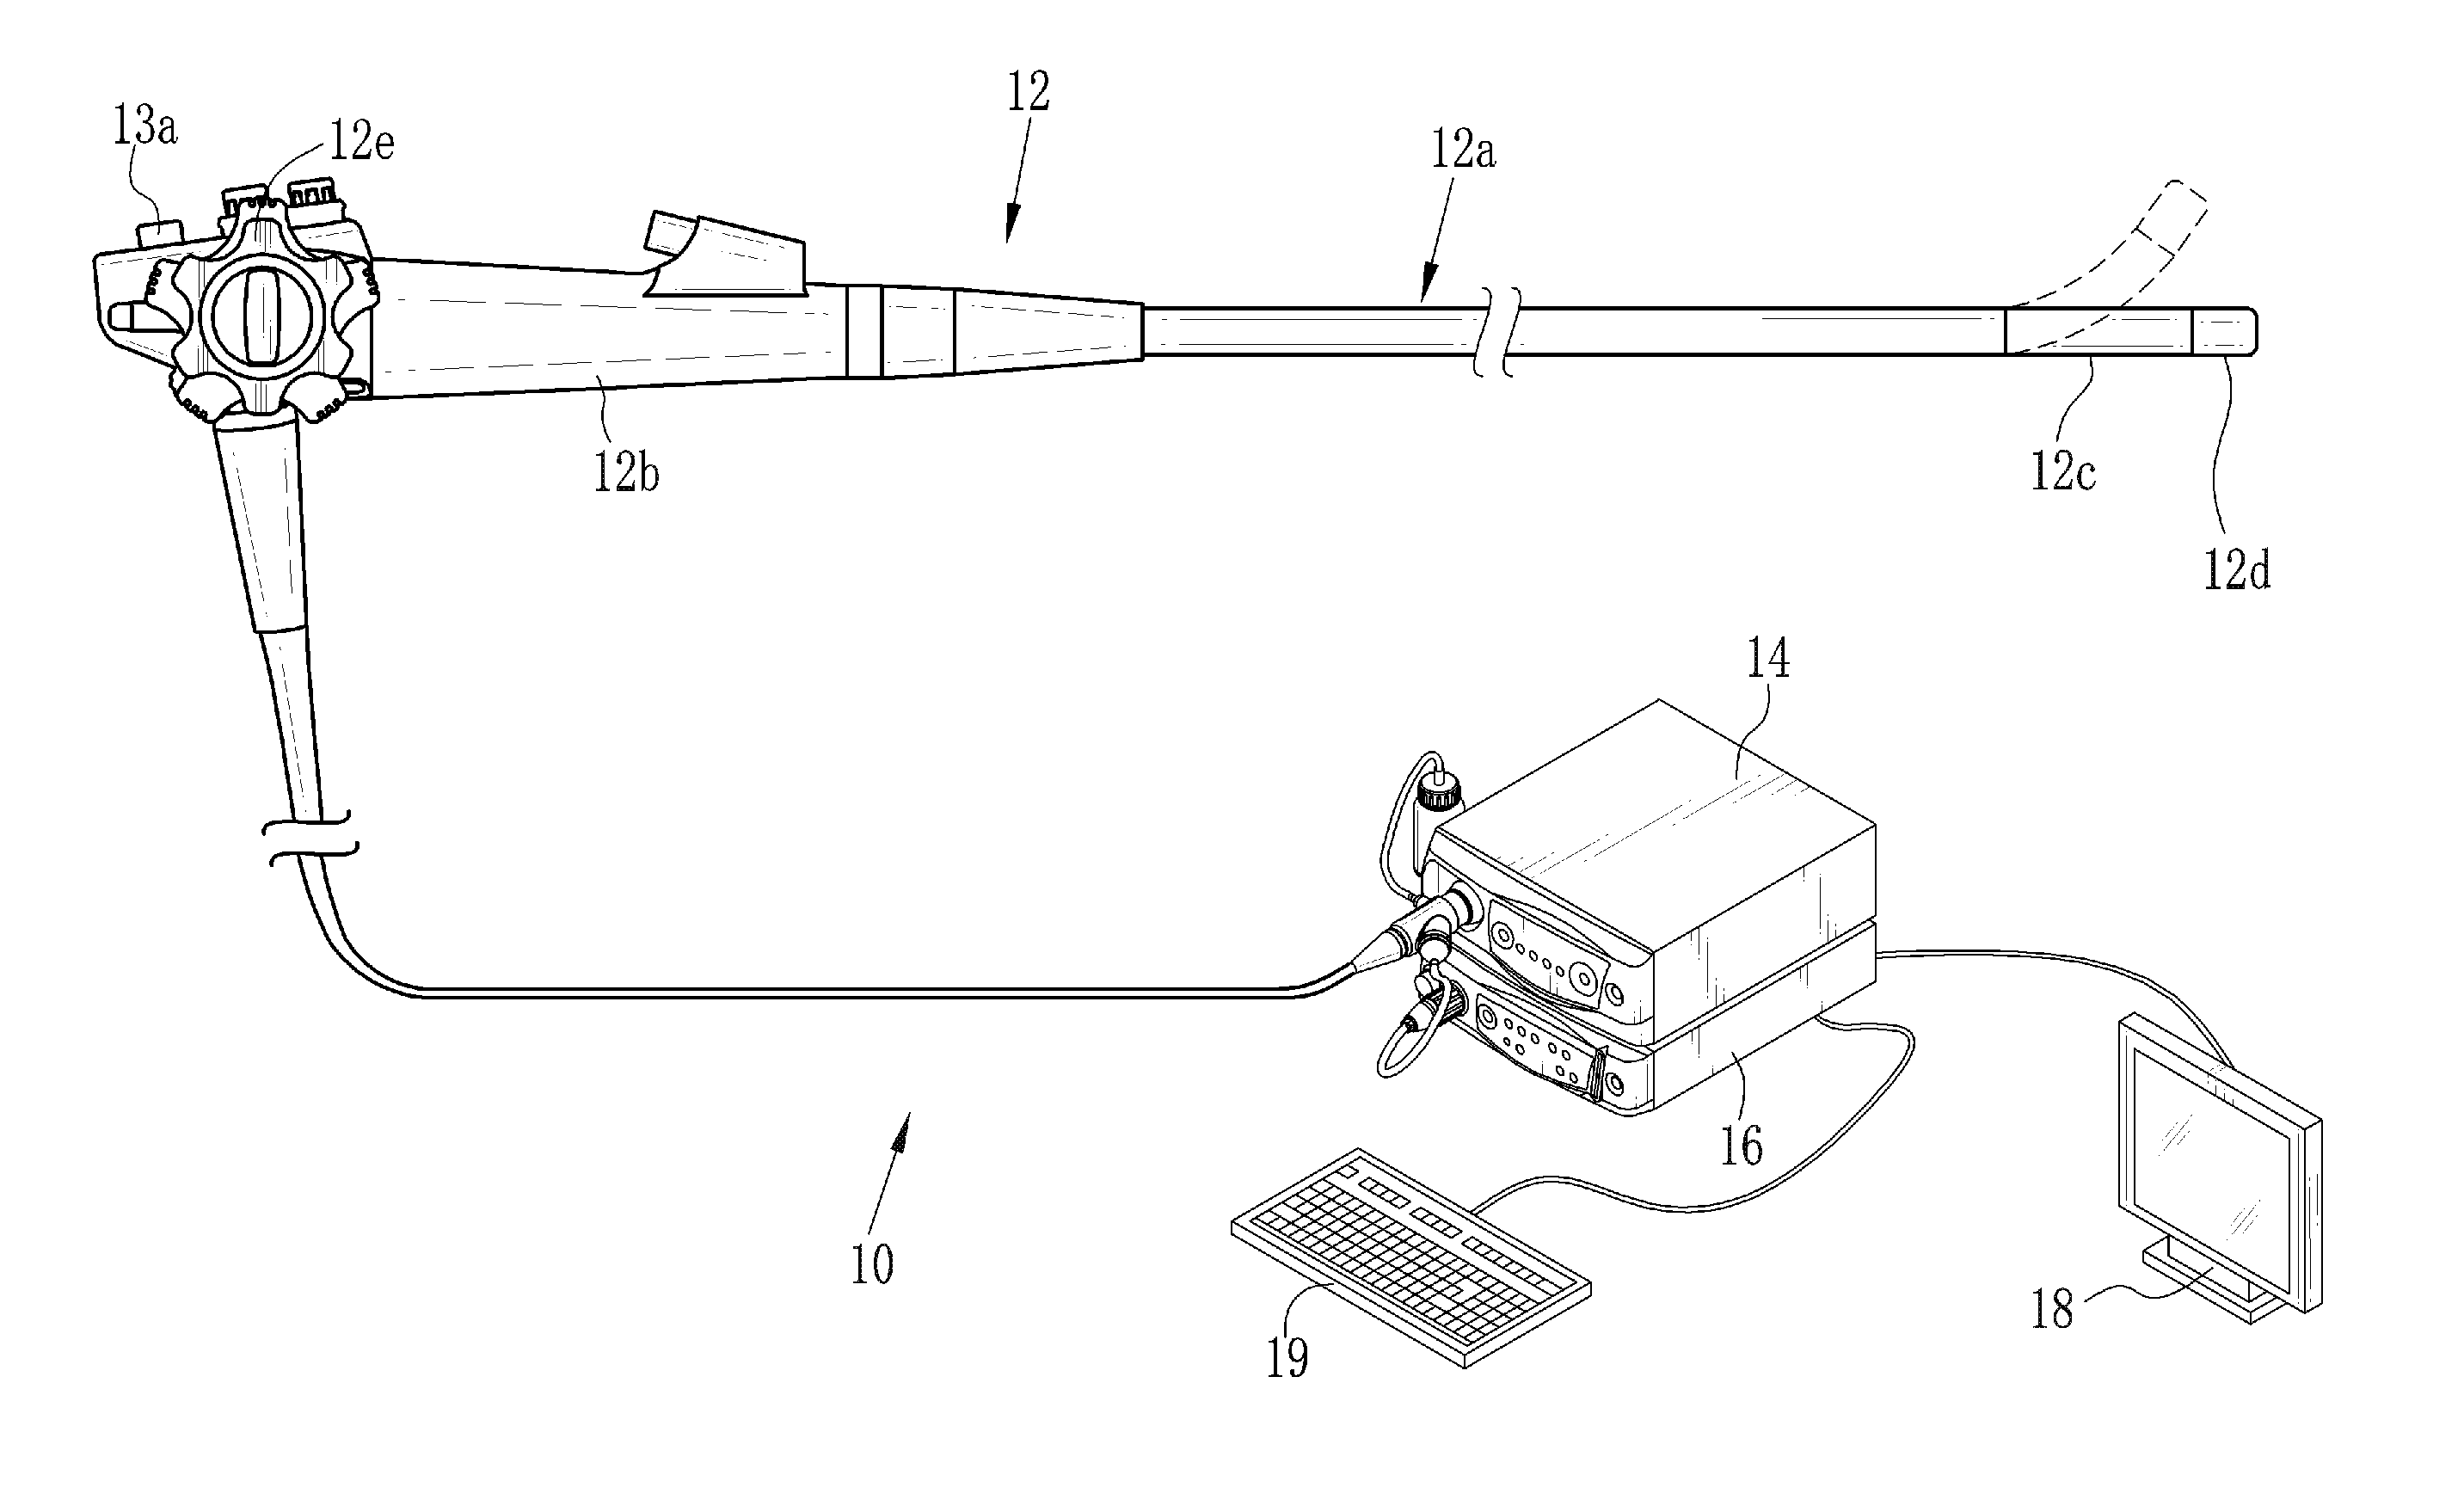 Medical image processing device, method for operating the same, and endoscope system